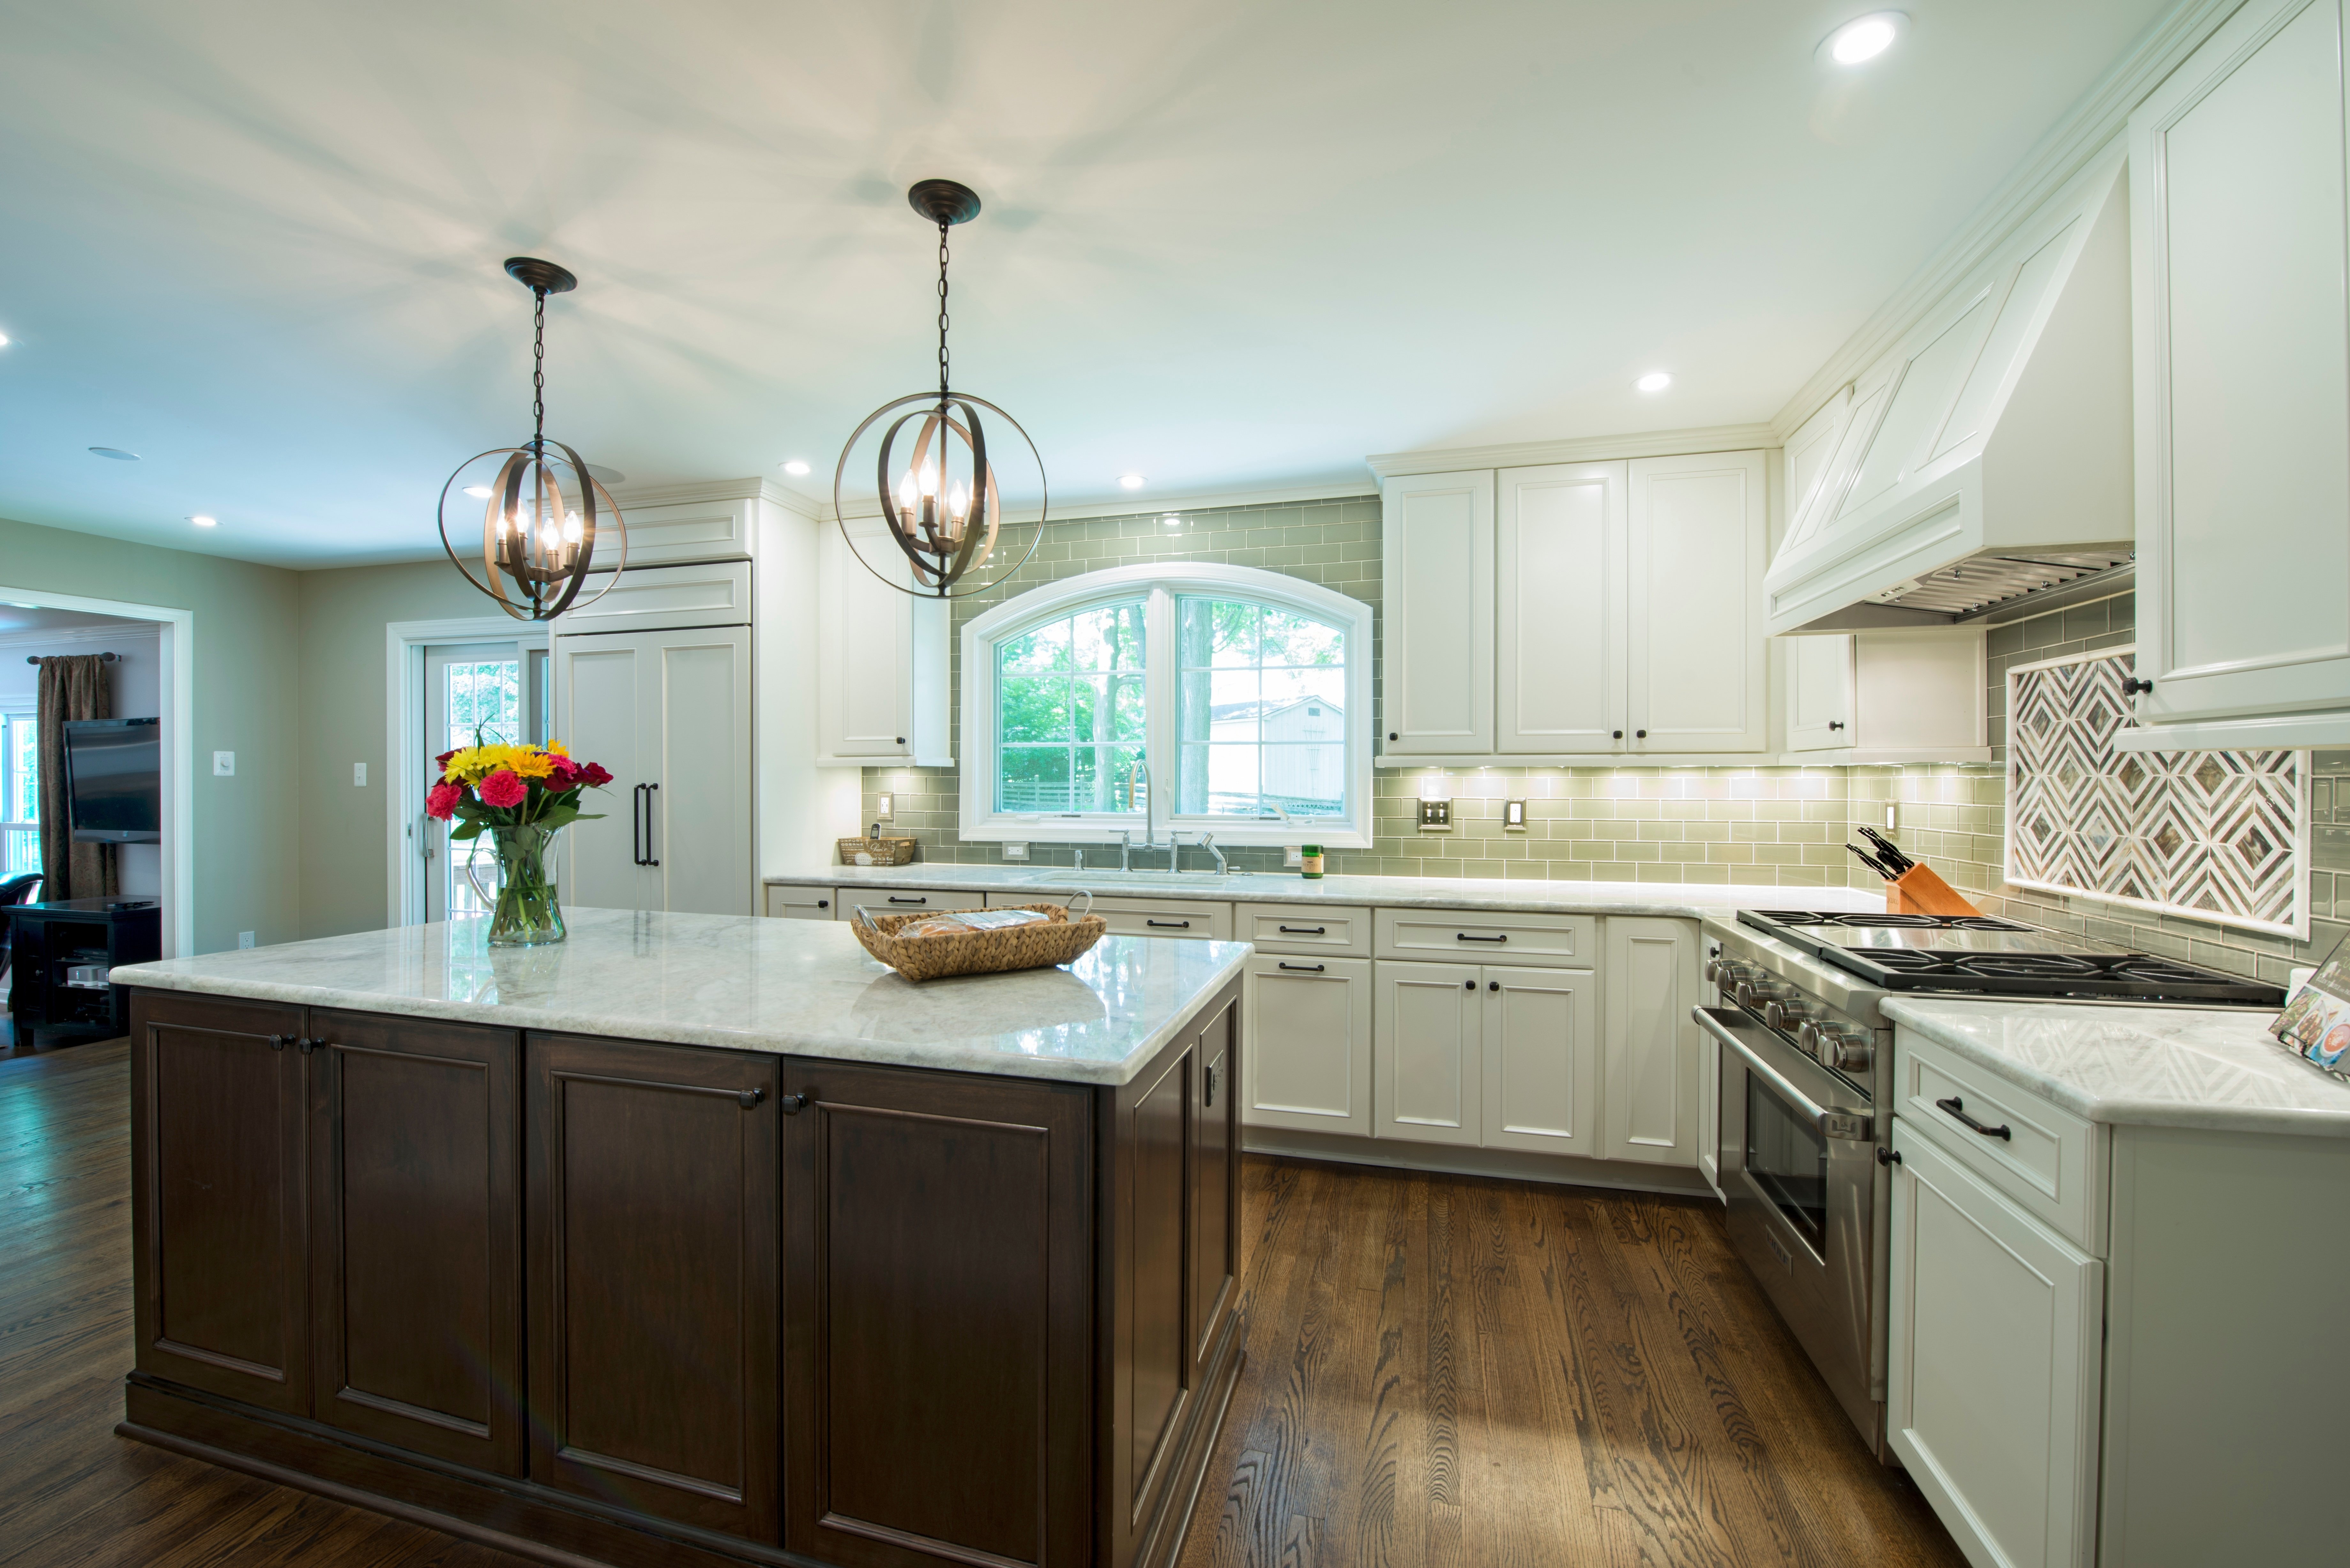 What is transitional kitchen design?